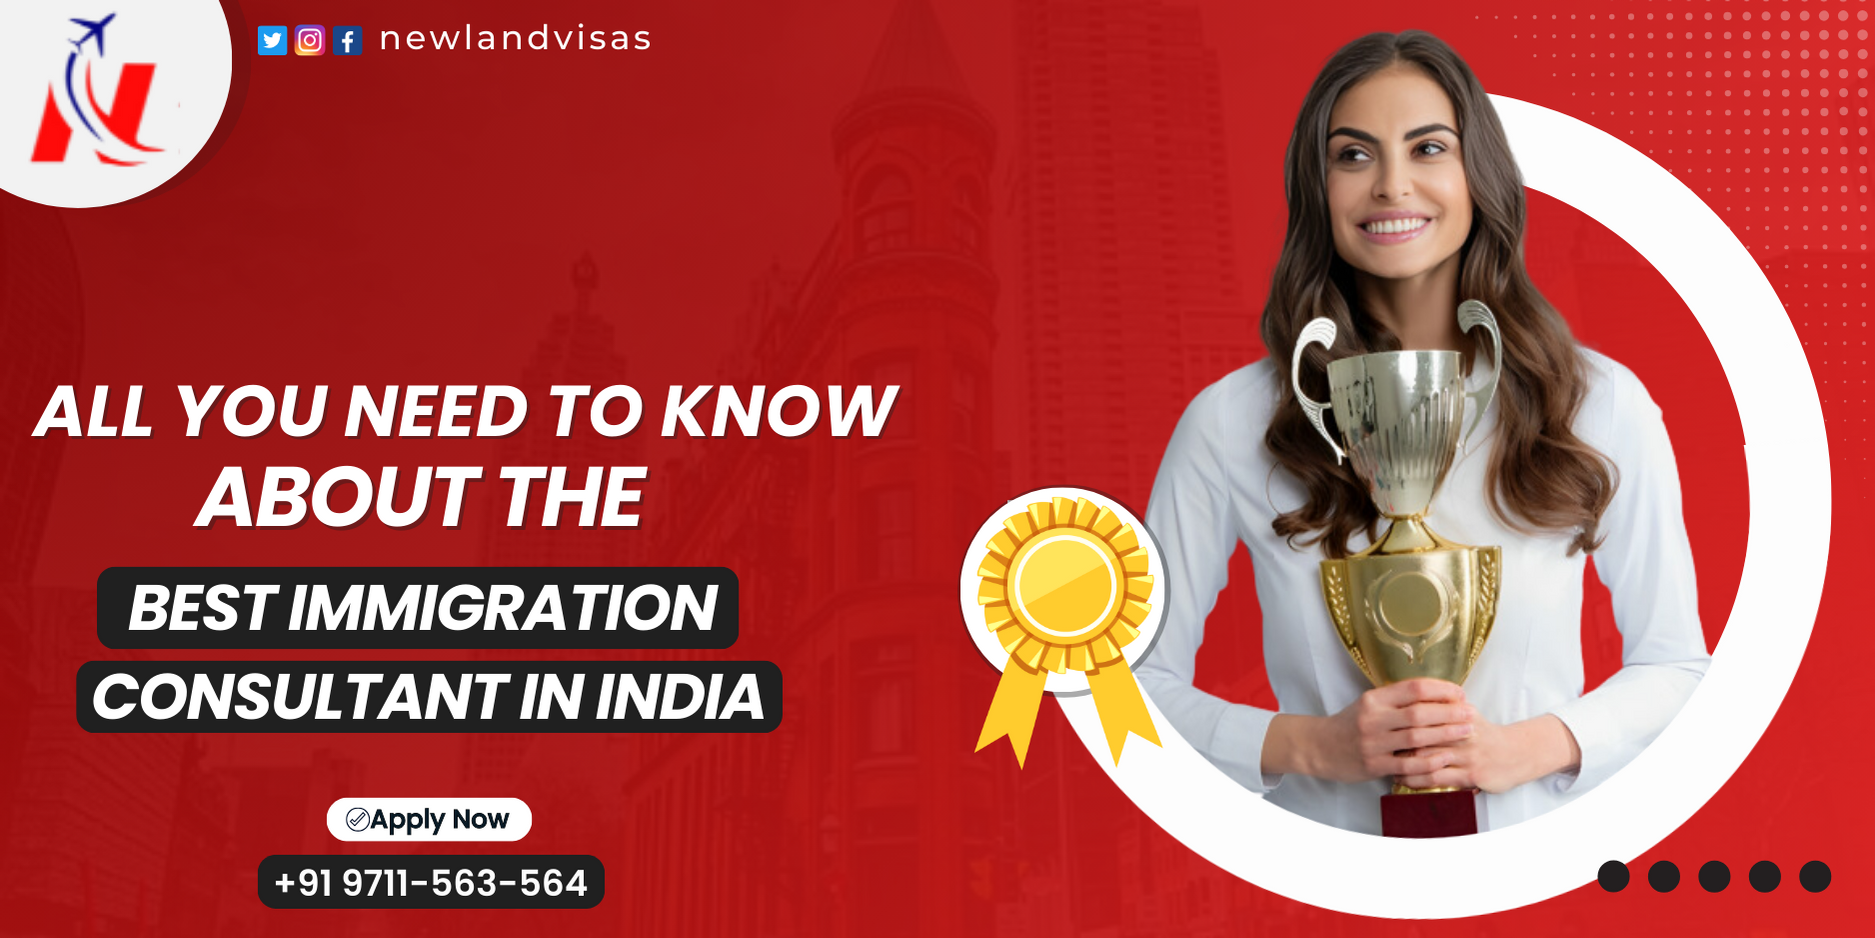 All you need to know about the best immigration consultant in India